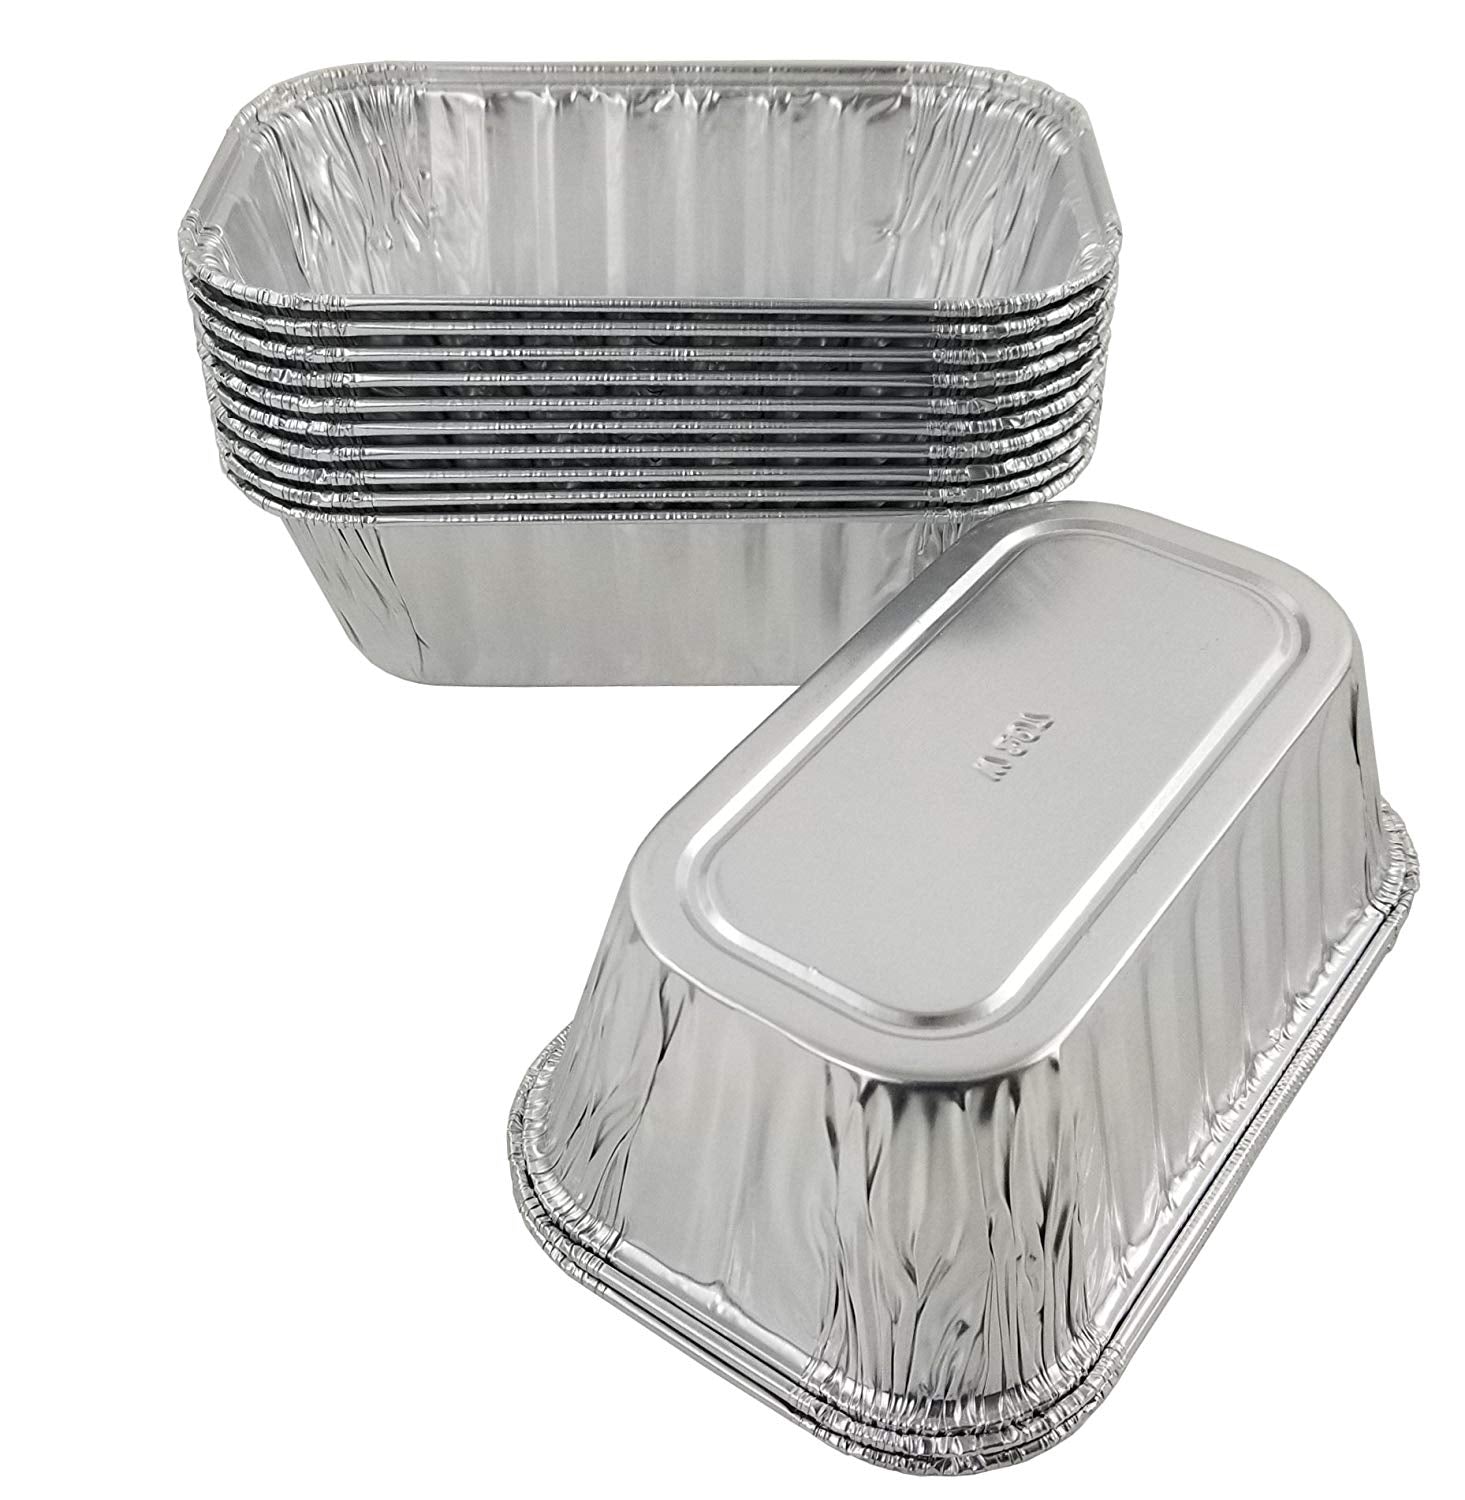 50 Pieces Paper Loaf Pan Disposable Paper Baking Pan with Lids Disposable